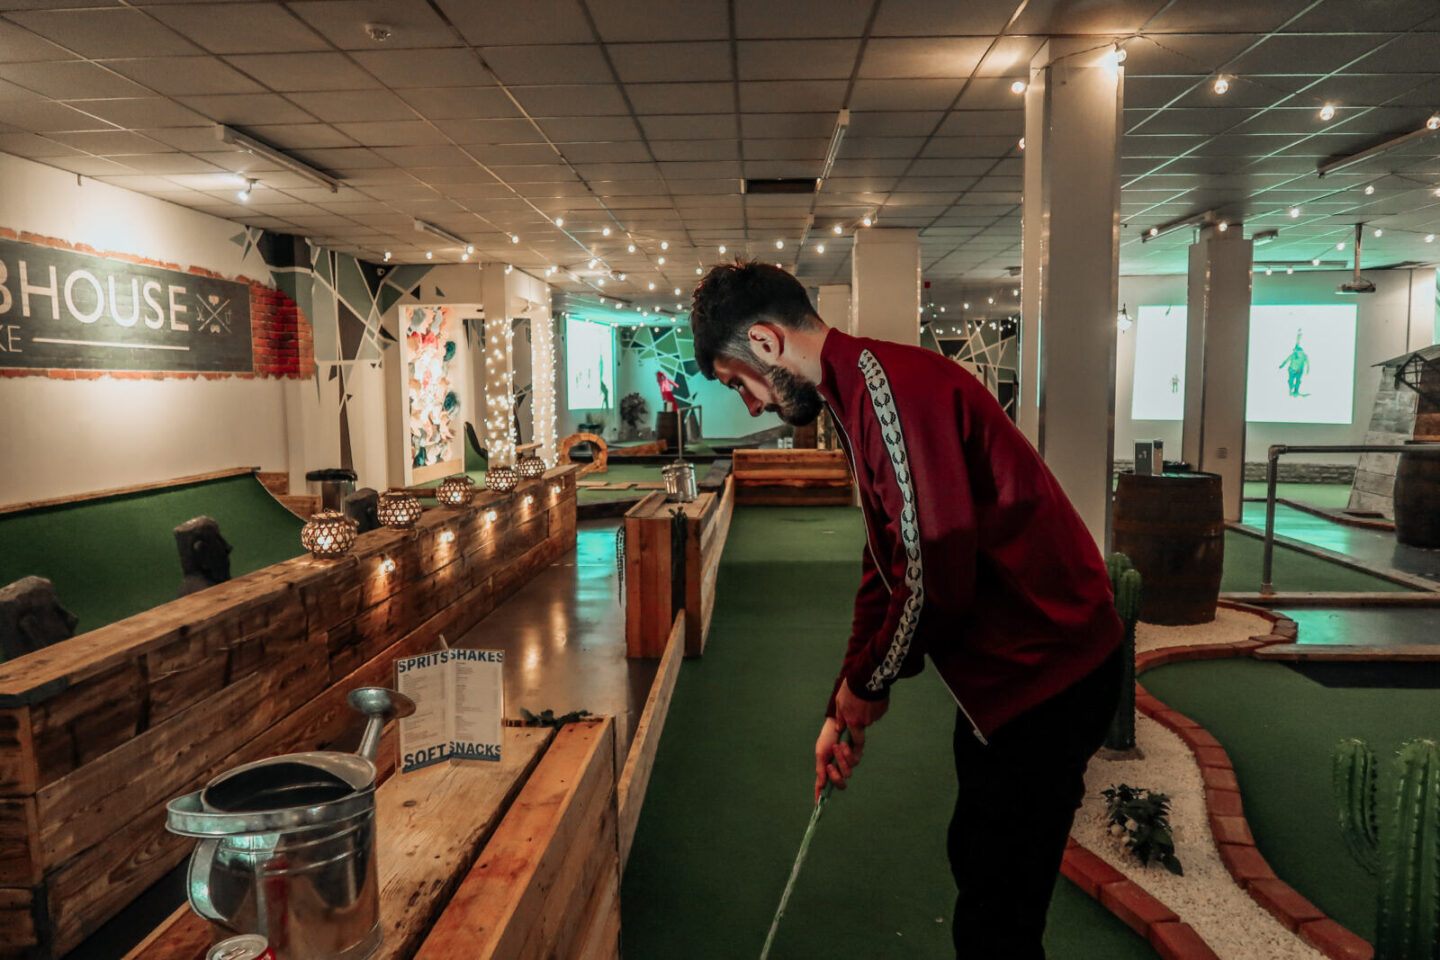 Clubhouse Stoke crazy mini golf and 80s arcade games - BEFFSHUFF